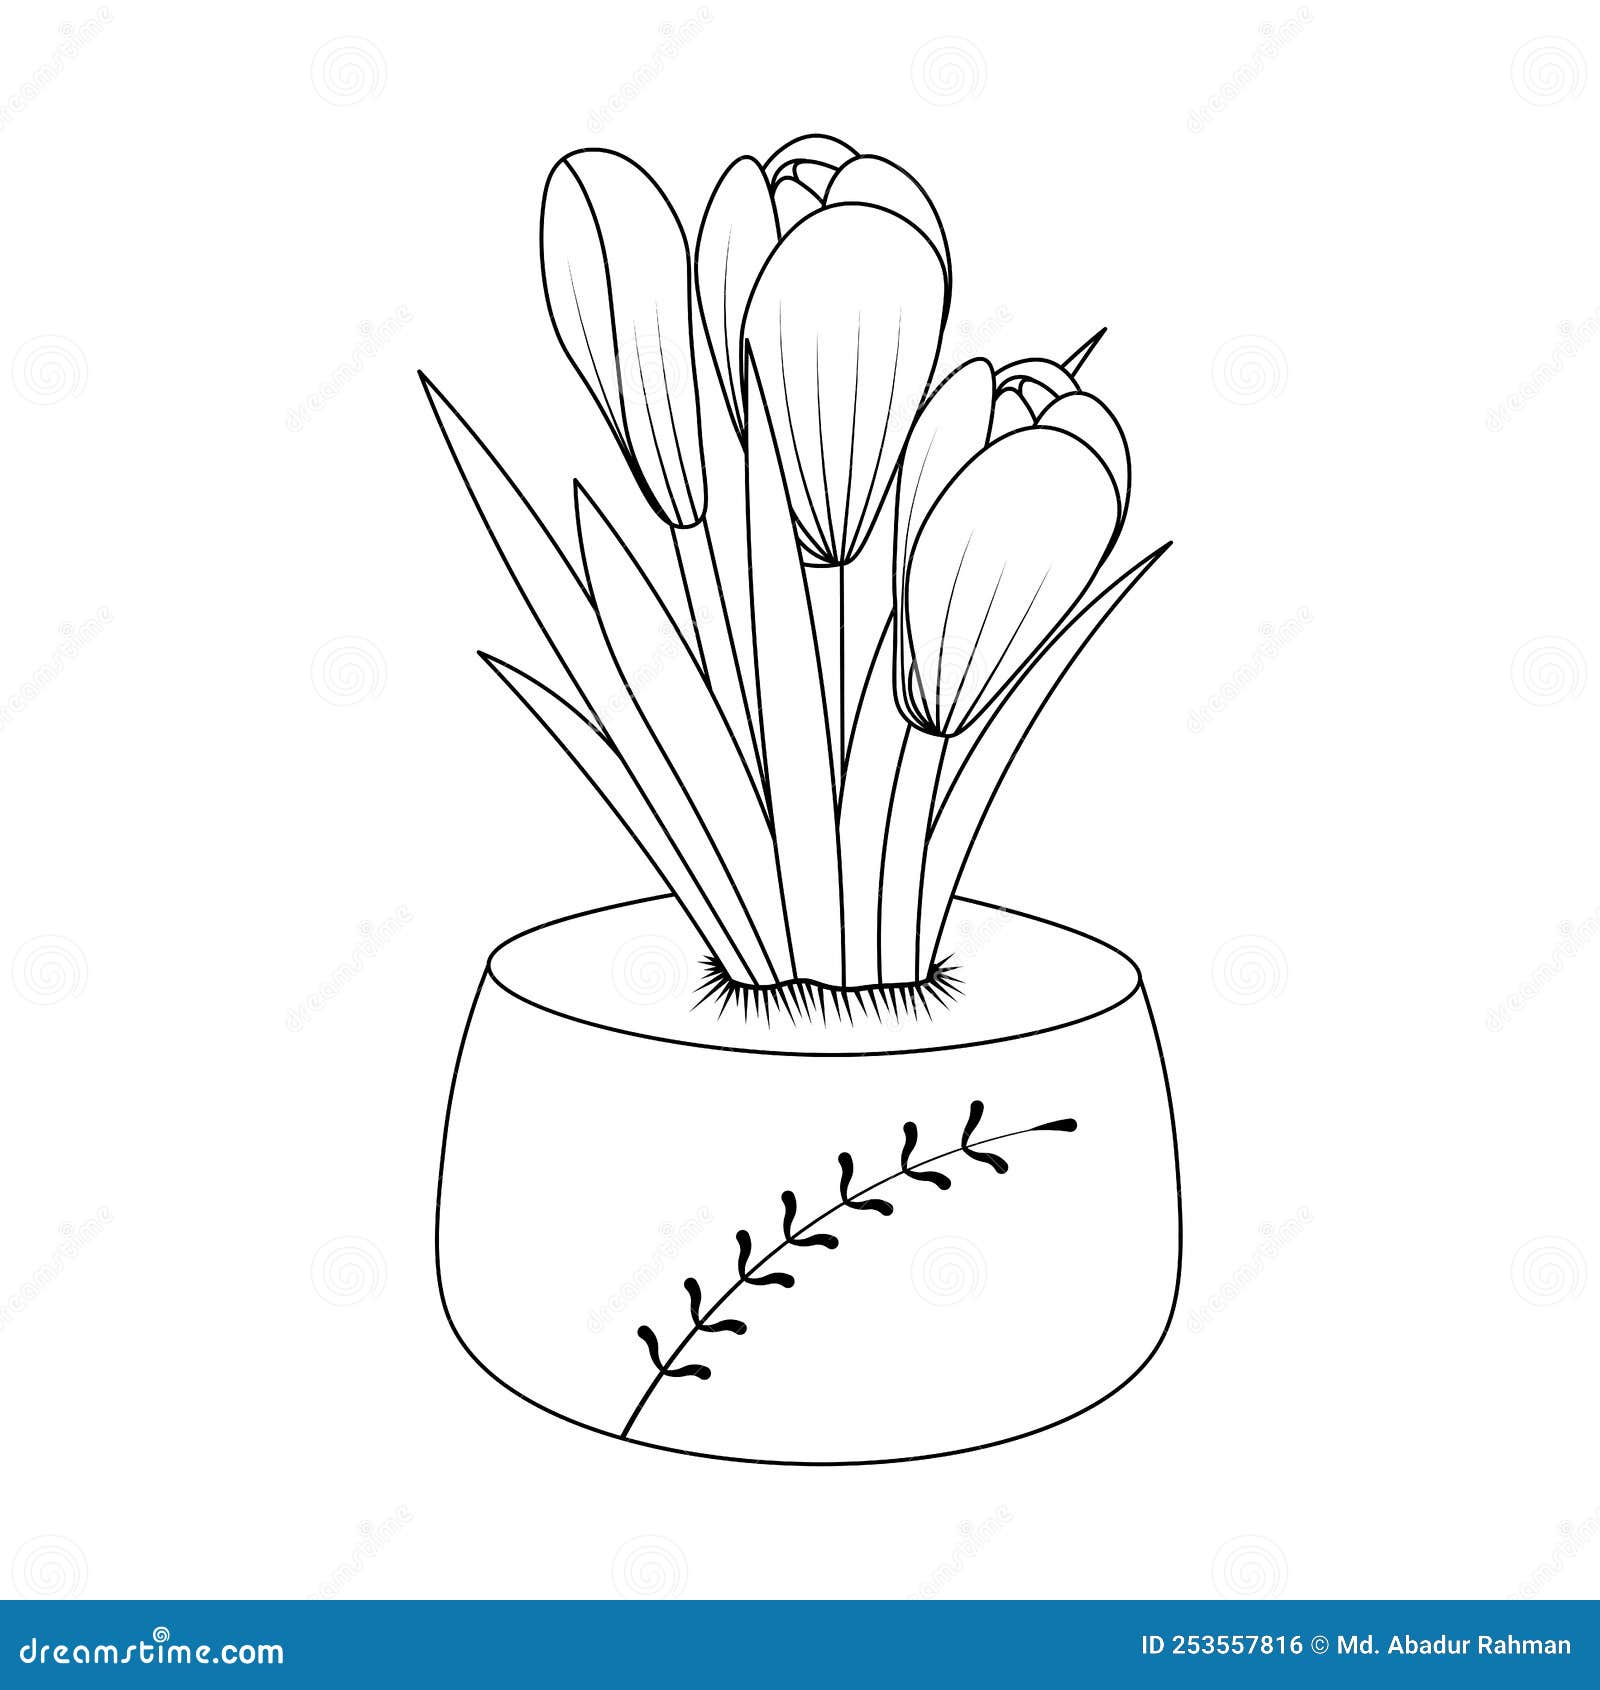 flower pot: pencil art | flower pot drawing. pencil used. by… | Flickr